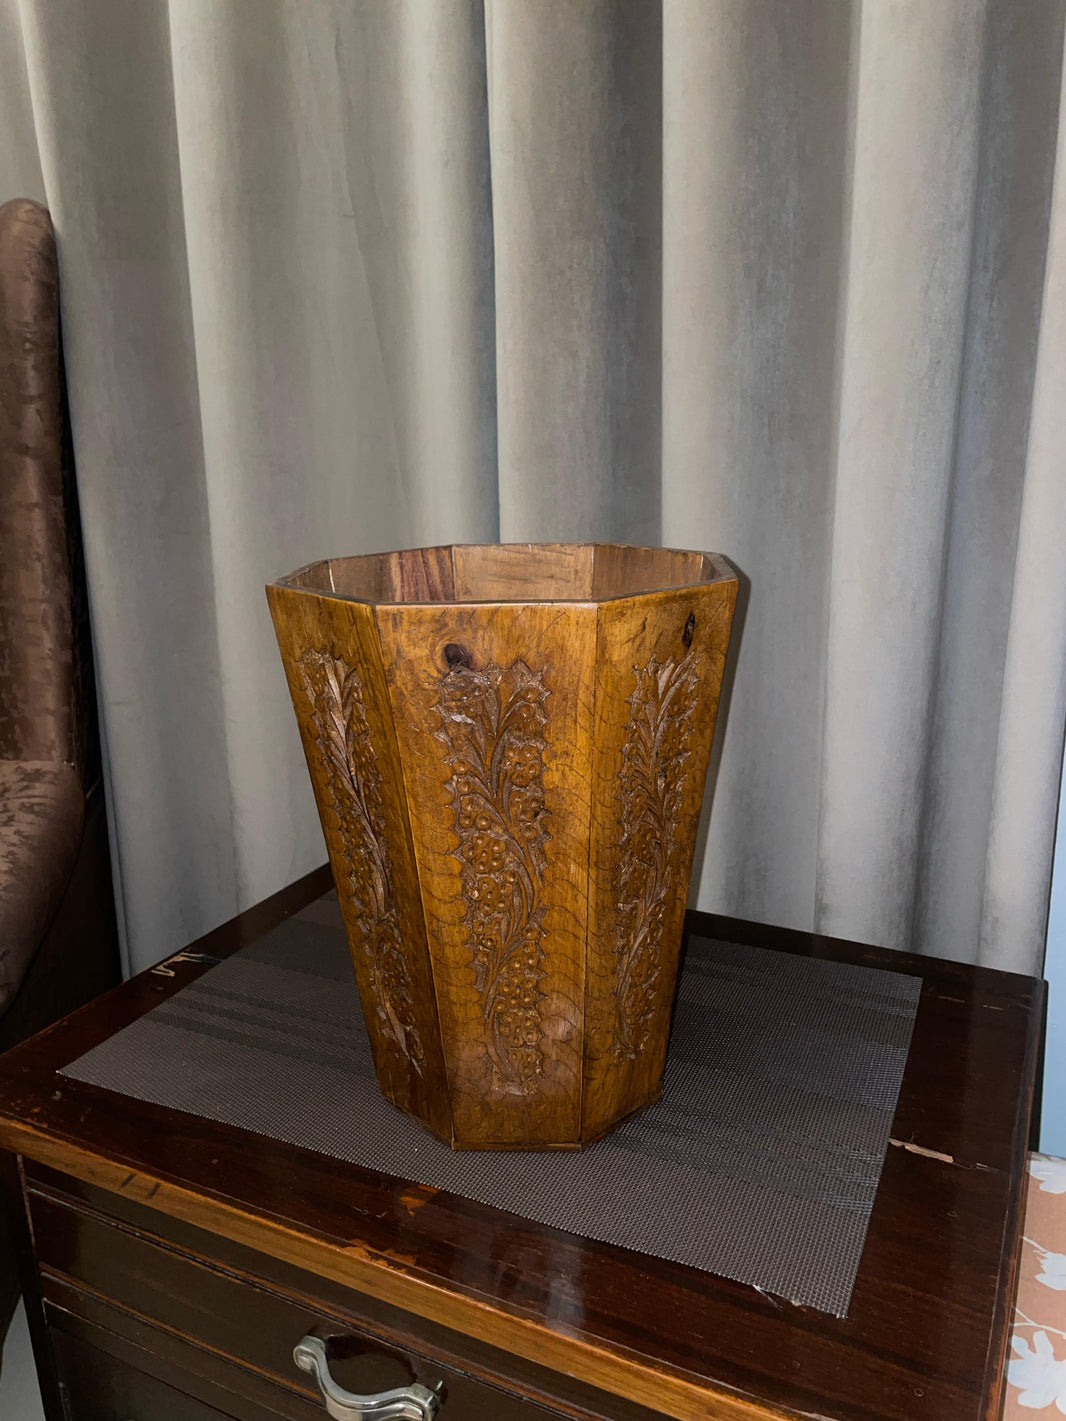 Handmade "Rustic Carved" Wooden Dustbin